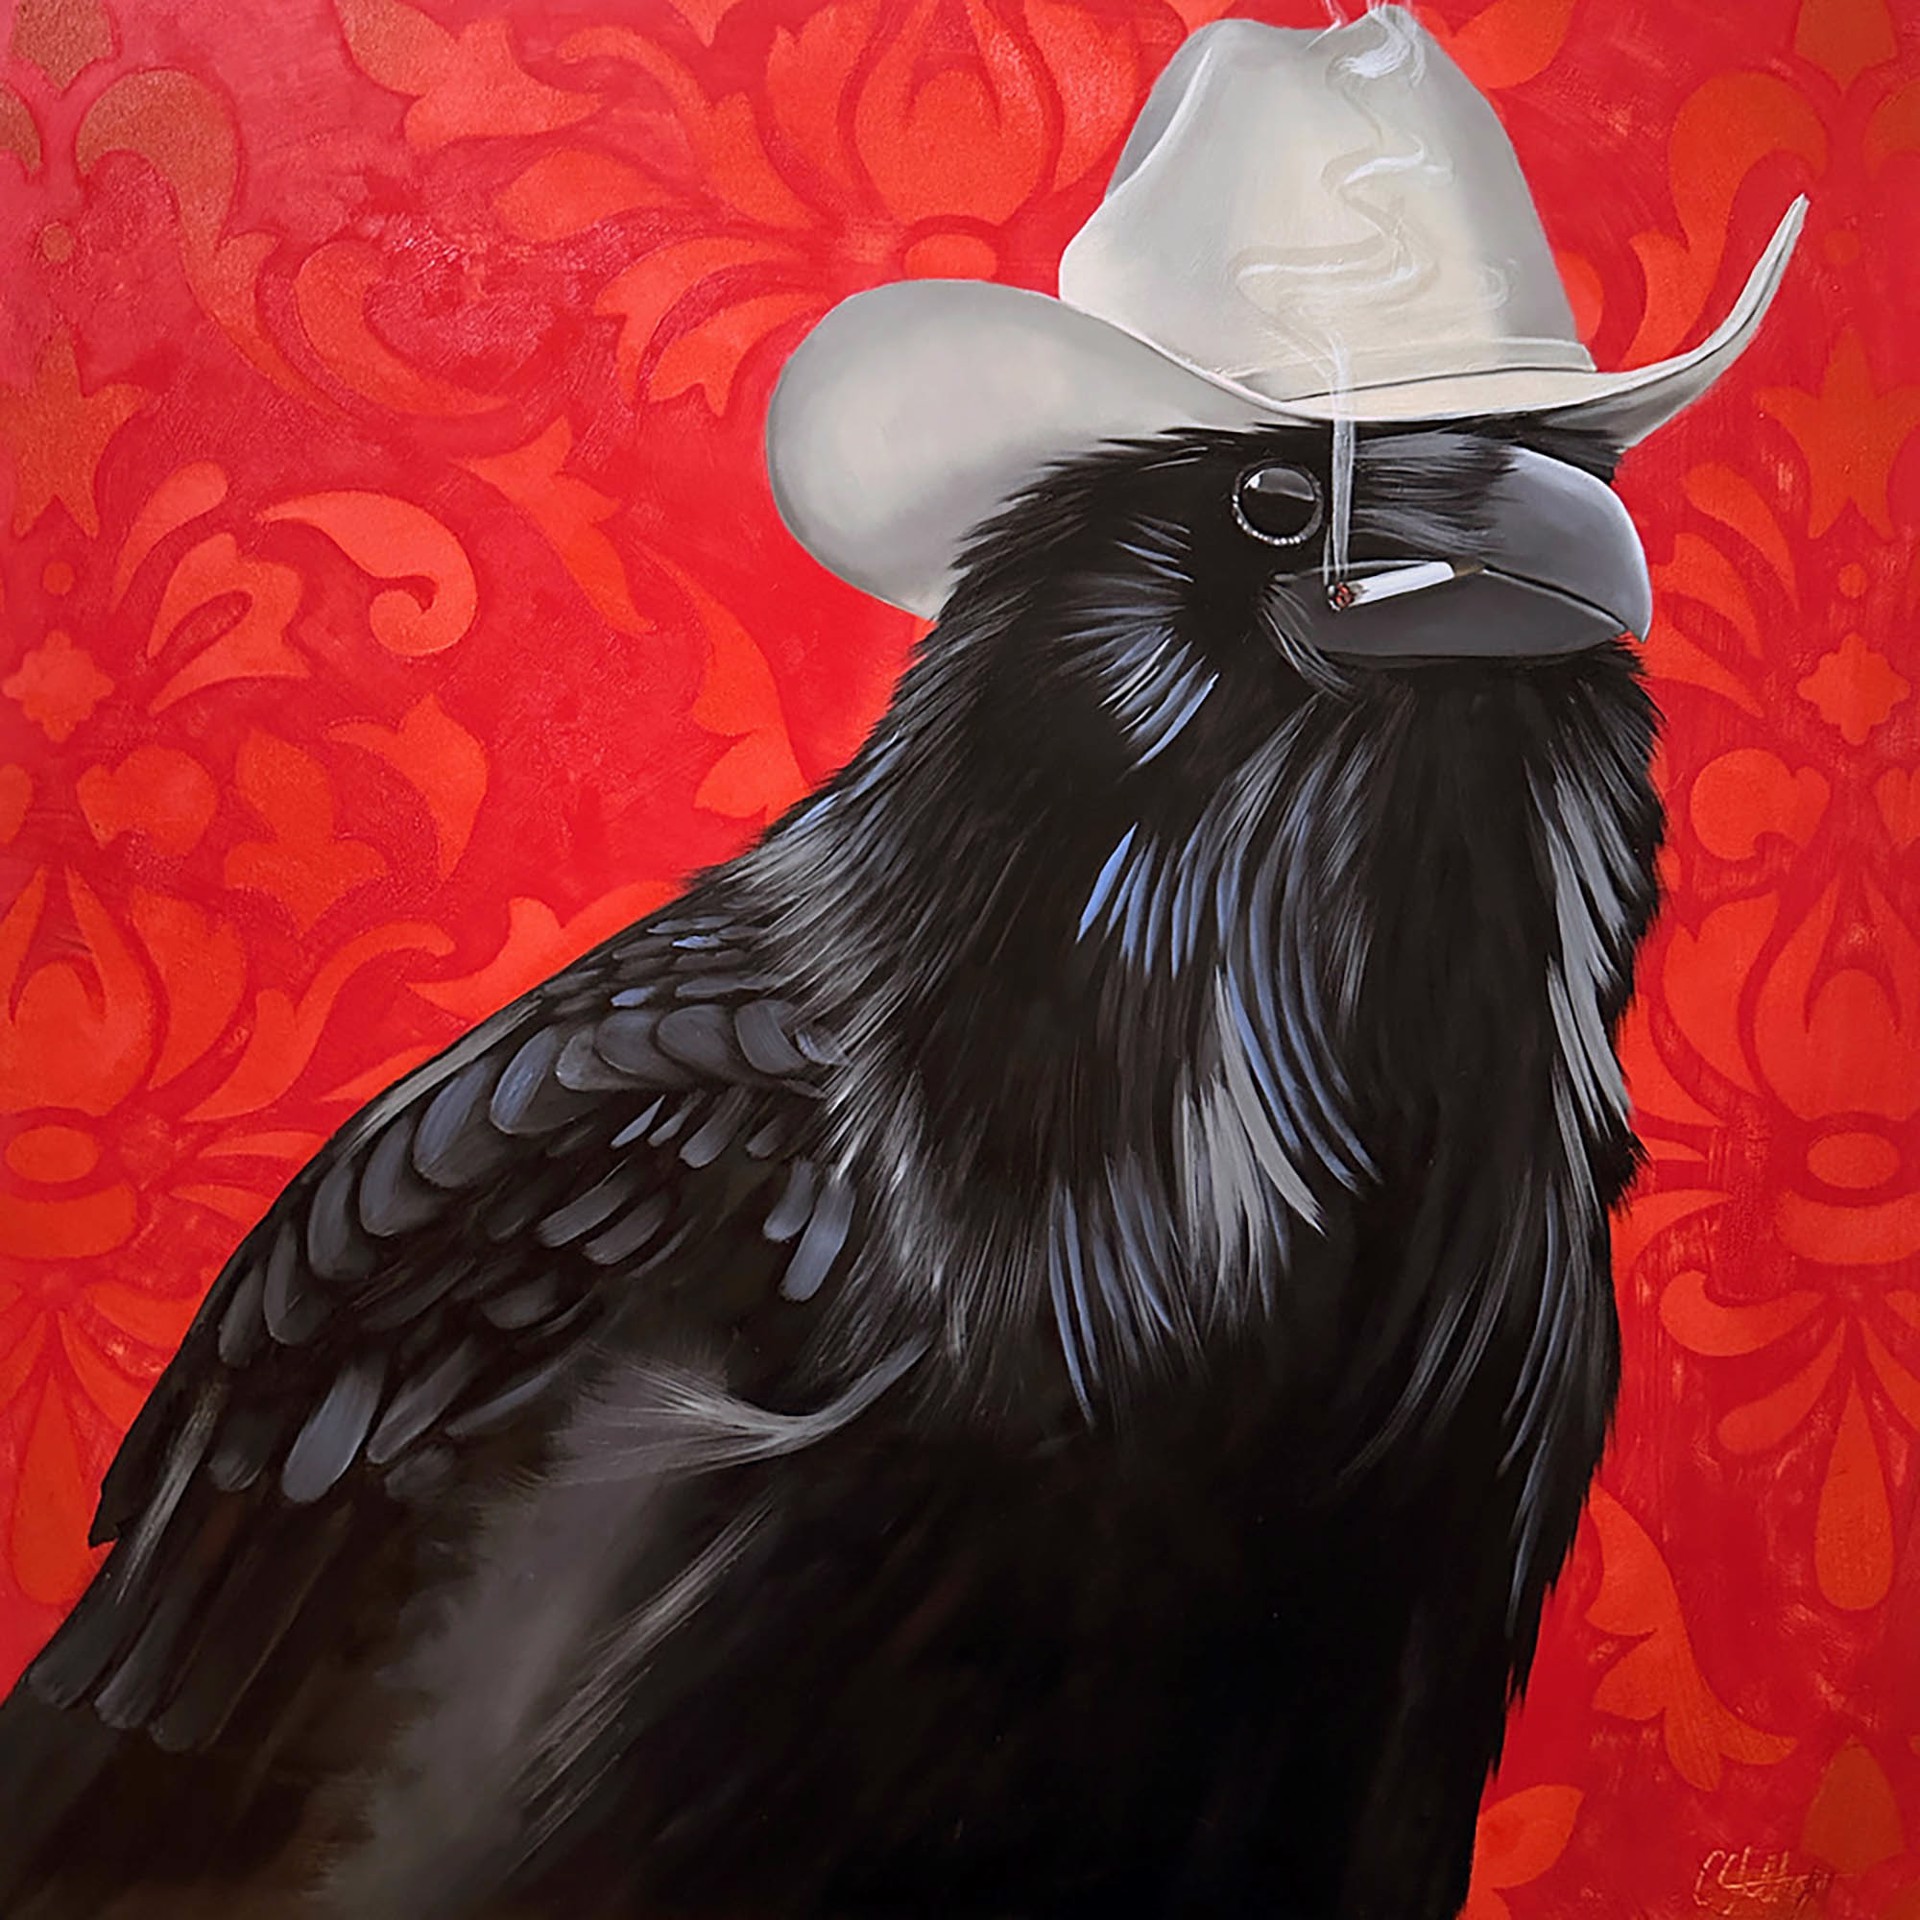 Original Painting by Christy Stallop Featuring a Raven Wearing a Cowboy Hat Smoking a Cigarette on a Red Background